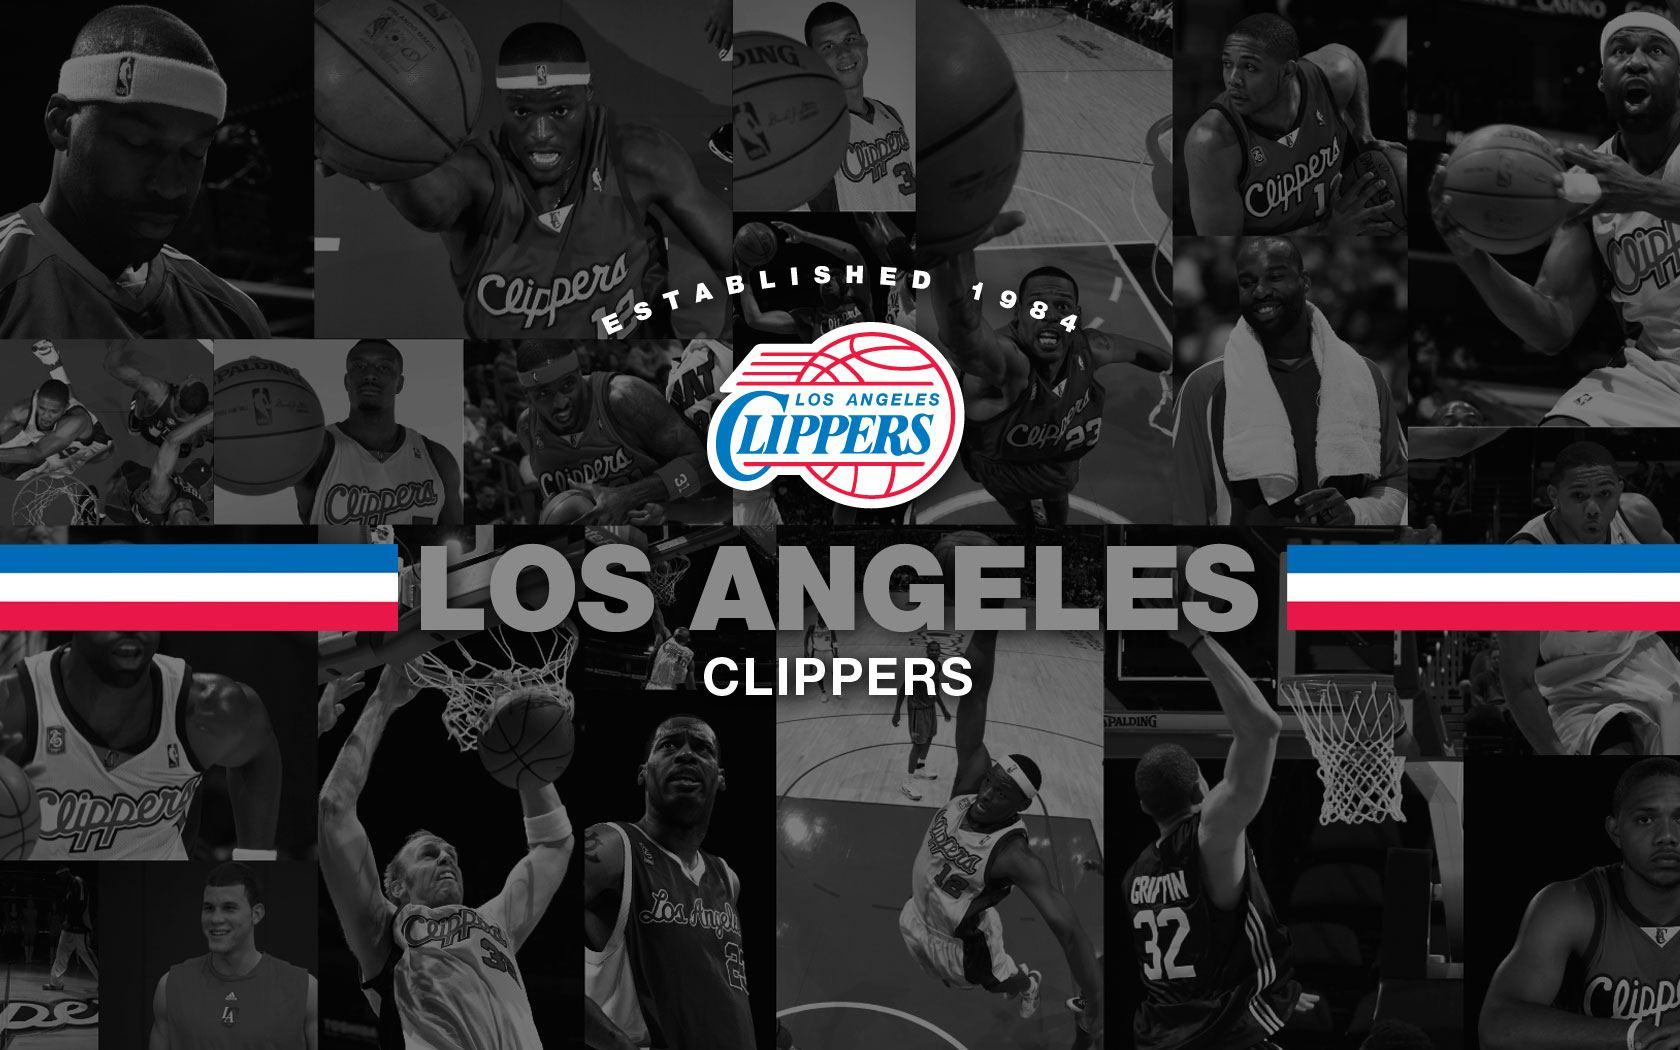 Los Angeles Clippers wallpaper HD free download